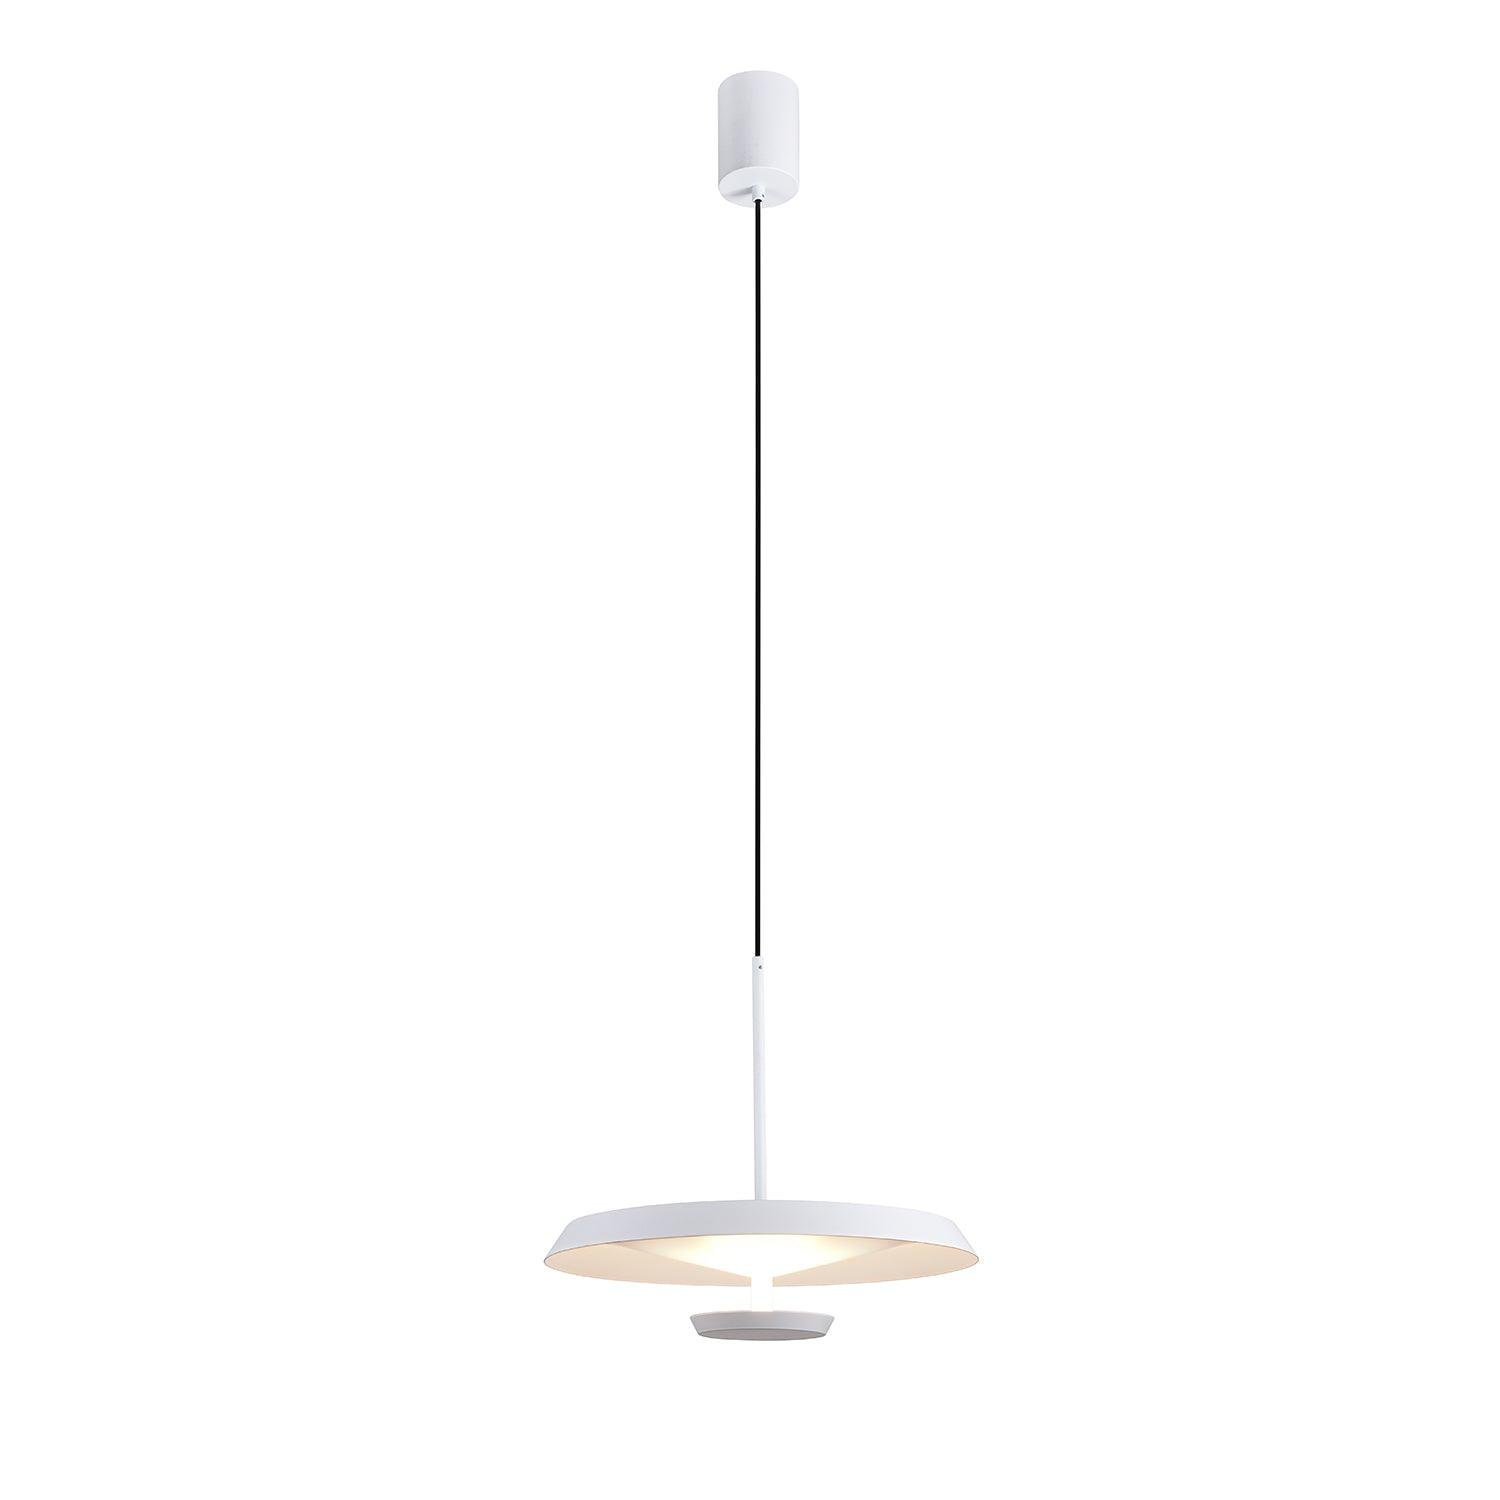 Flat Pendant Light in White with Cool Light, measuring Ø 15.7″ x H 14.4″ or Dia 40cm x H 36.5cm